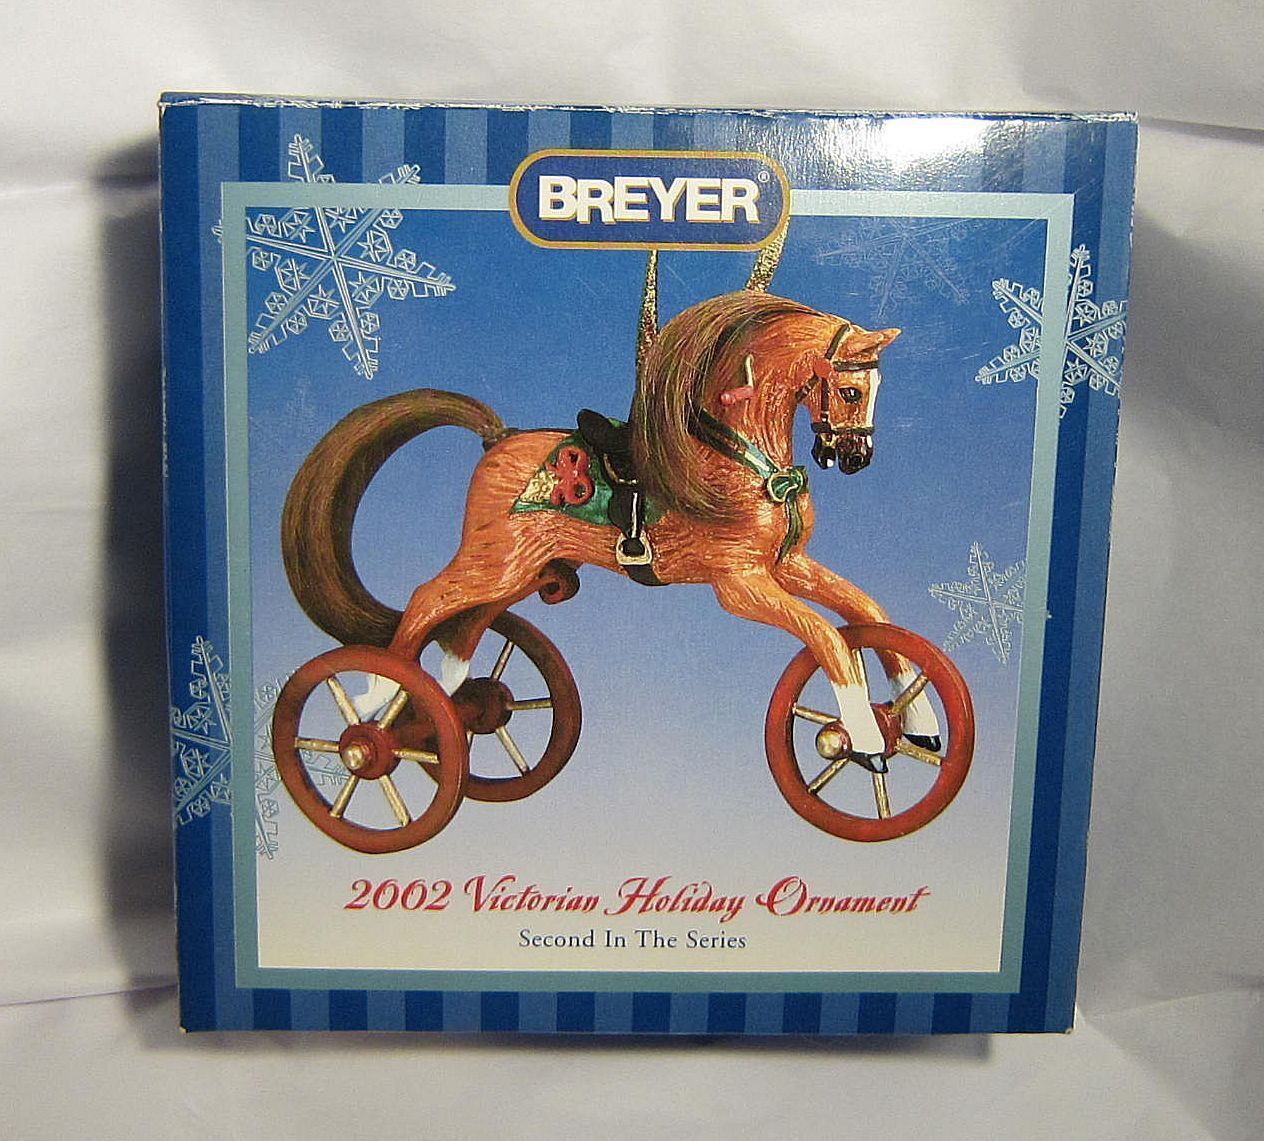 Breyer Horse 2002 Victorian Holiday Ornament Second in series Retired NIB - $34.00